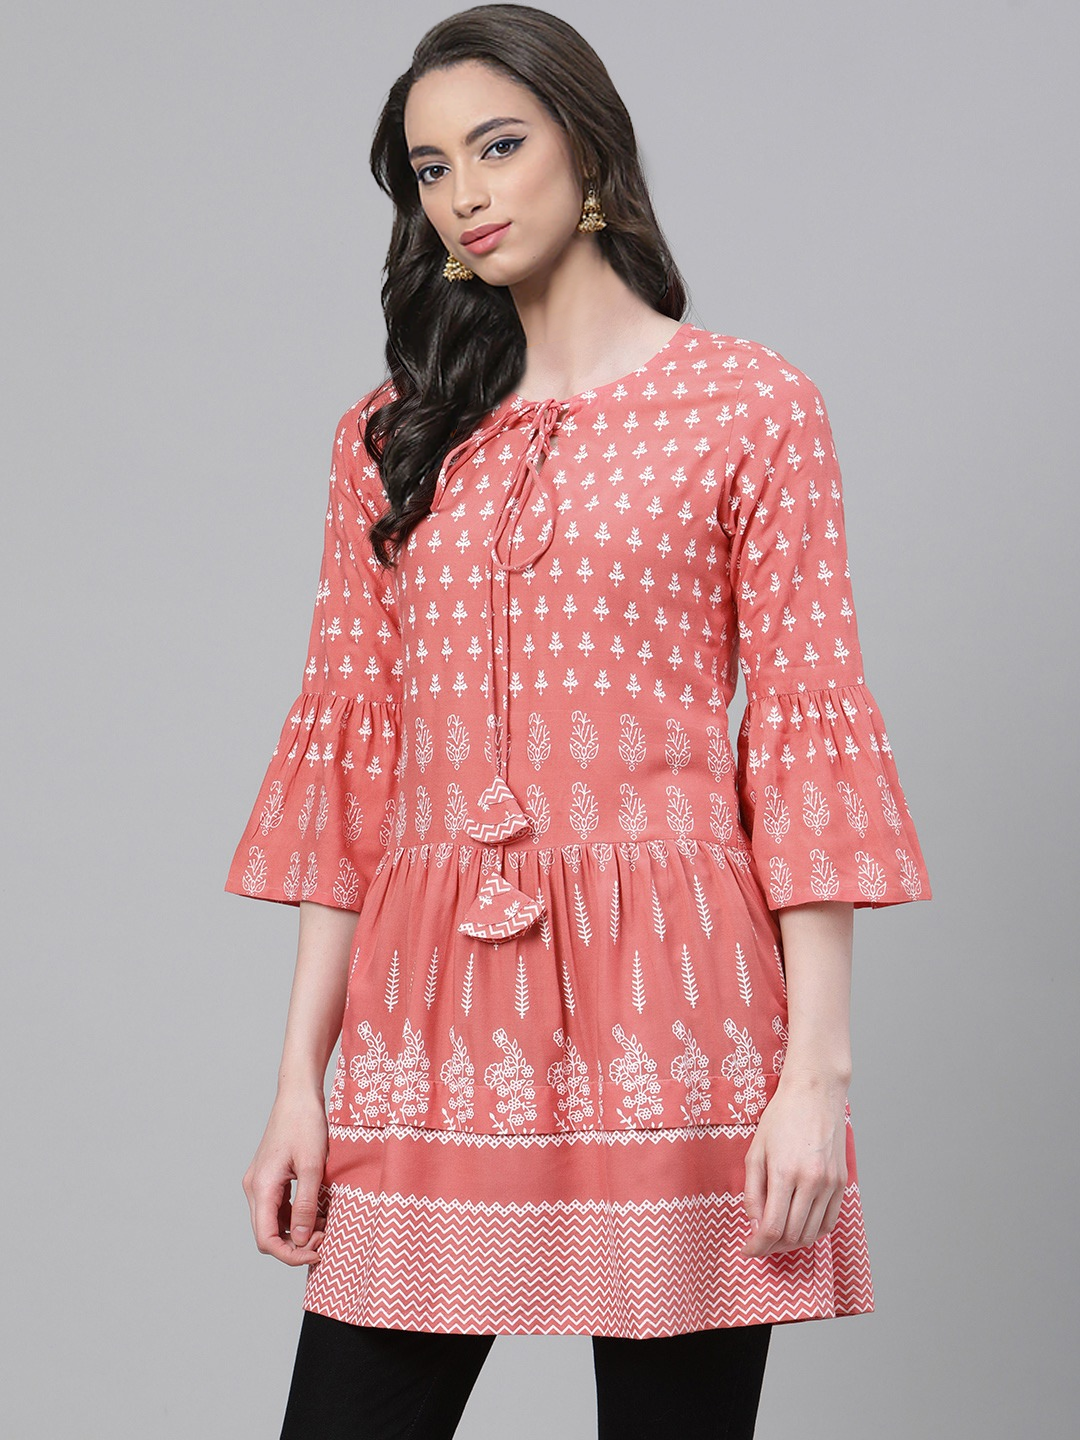 Blue Hills Short Walkway Vol 2 New Collection Of Printed Rayon Daily Wear Short  Kurtis - The Ethnic World